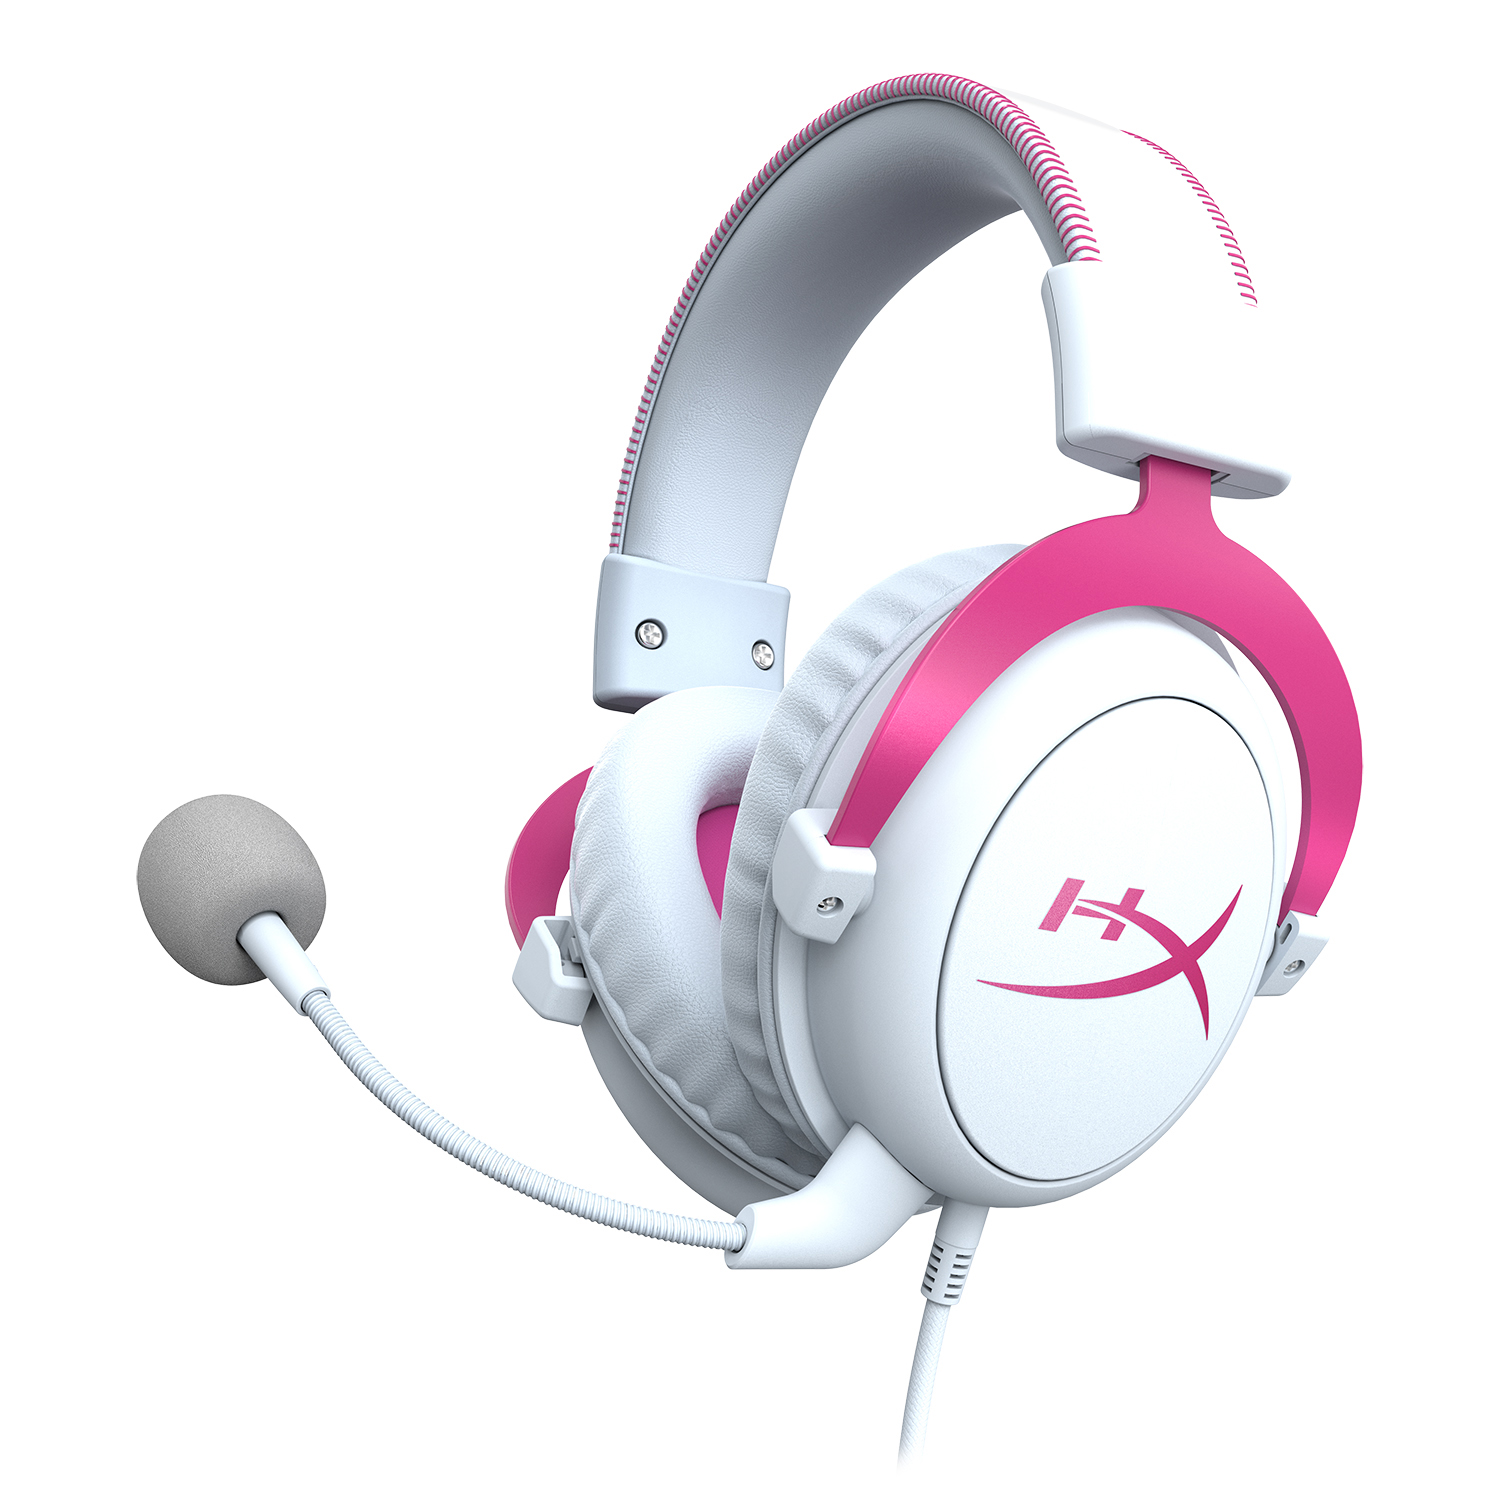 HyperX launches three new Cloud headsets at CES 2022 - Dot Esports